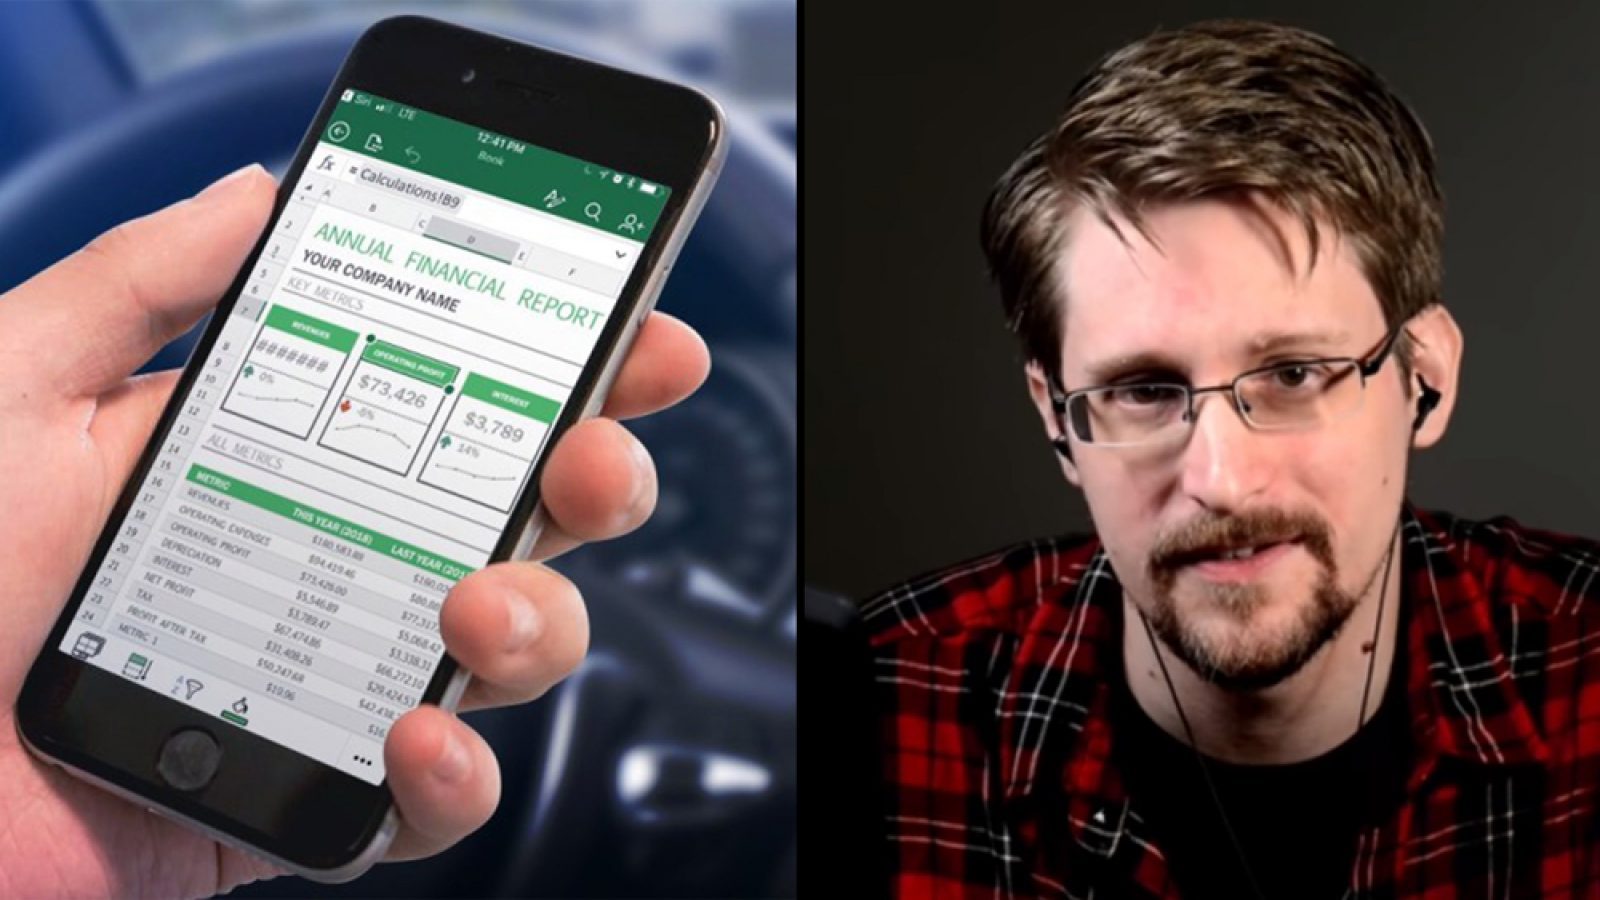 snowden-explains-how-cell-phones-spy-on-you-during-joe-rogan-podcast-3805391